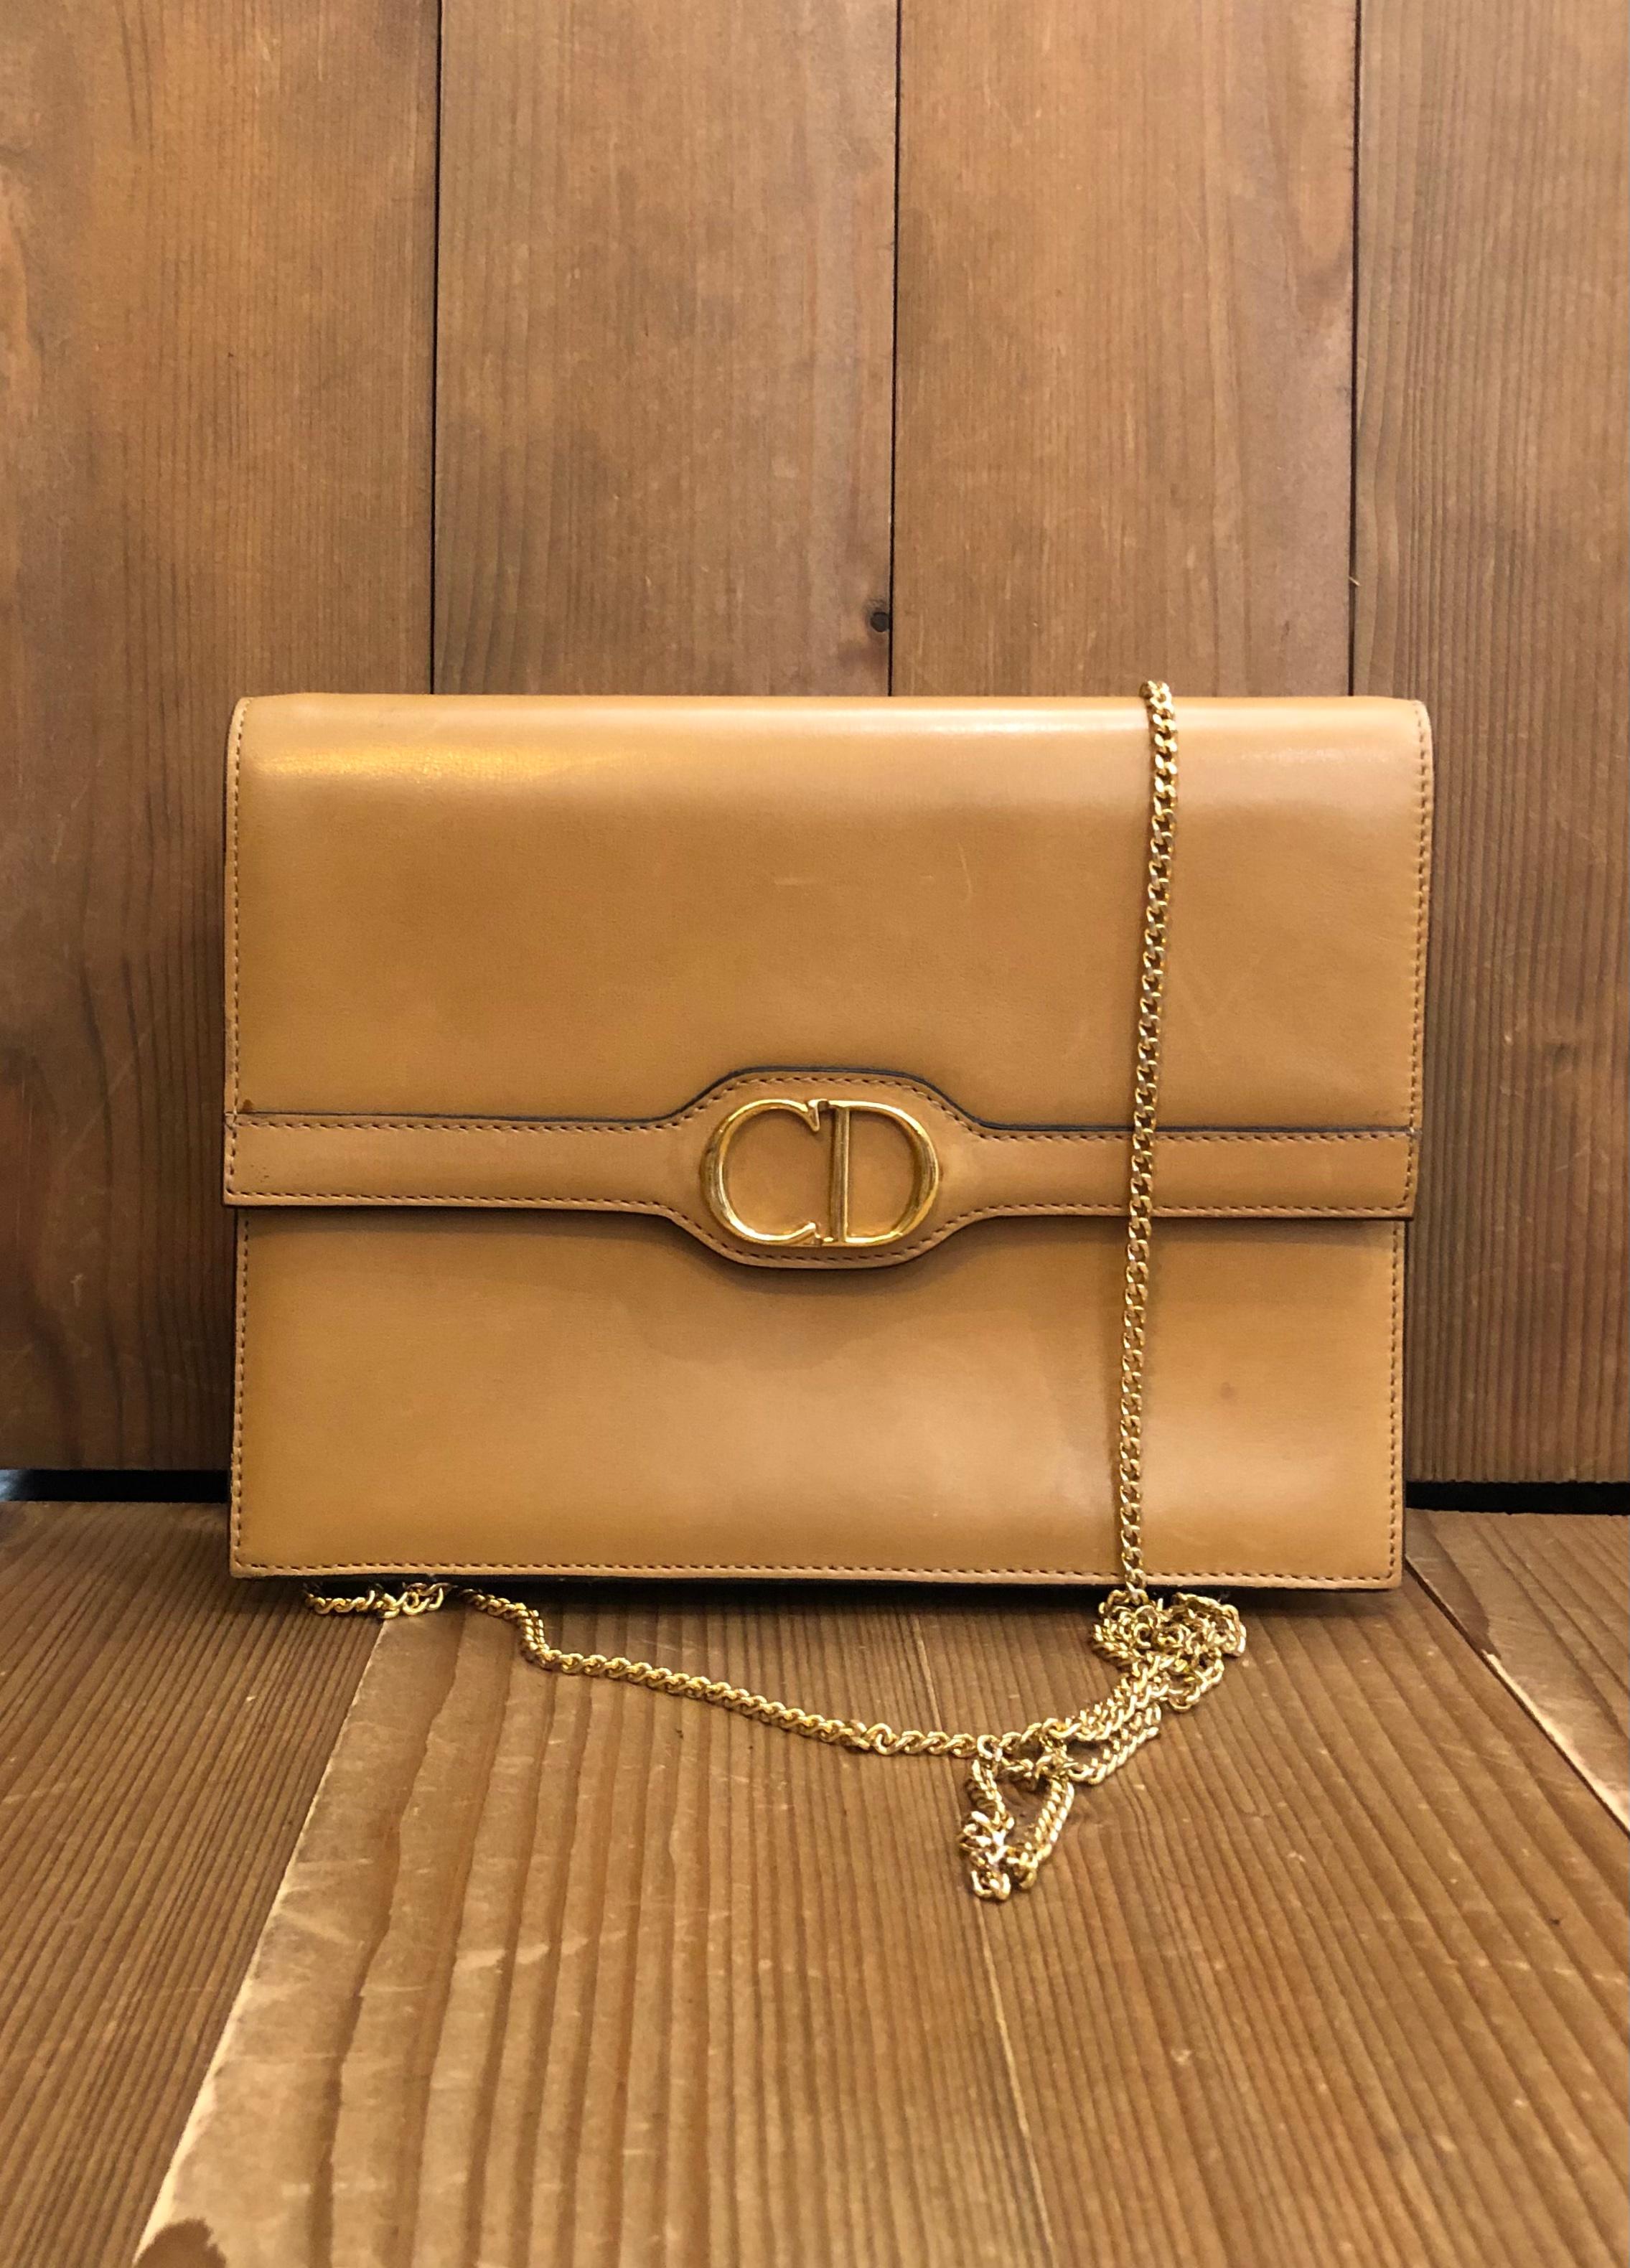 This vintage CHRISTIAN DIOR small box bag is crafted of smooth calfskin leather in beige. This vintage Dior features a detachable Dior gold toned chain allowing you to carry it as a crossbody bag or as a clutch. Front flap magnetic snap closure